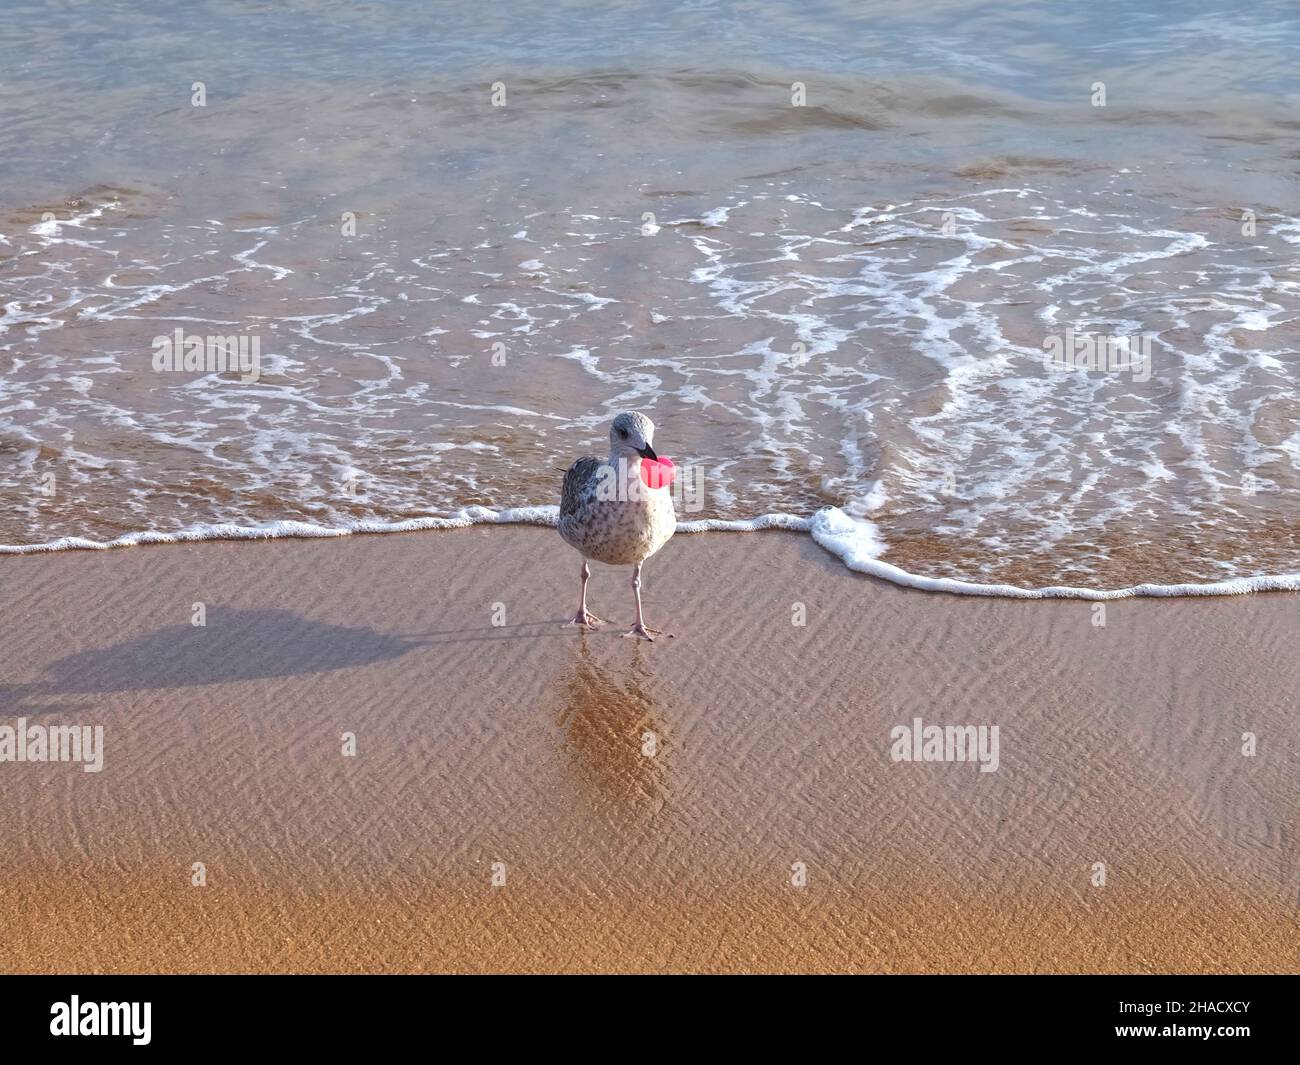 Marine pollution - a seagull with pink plastic item at the beach Stock Photo